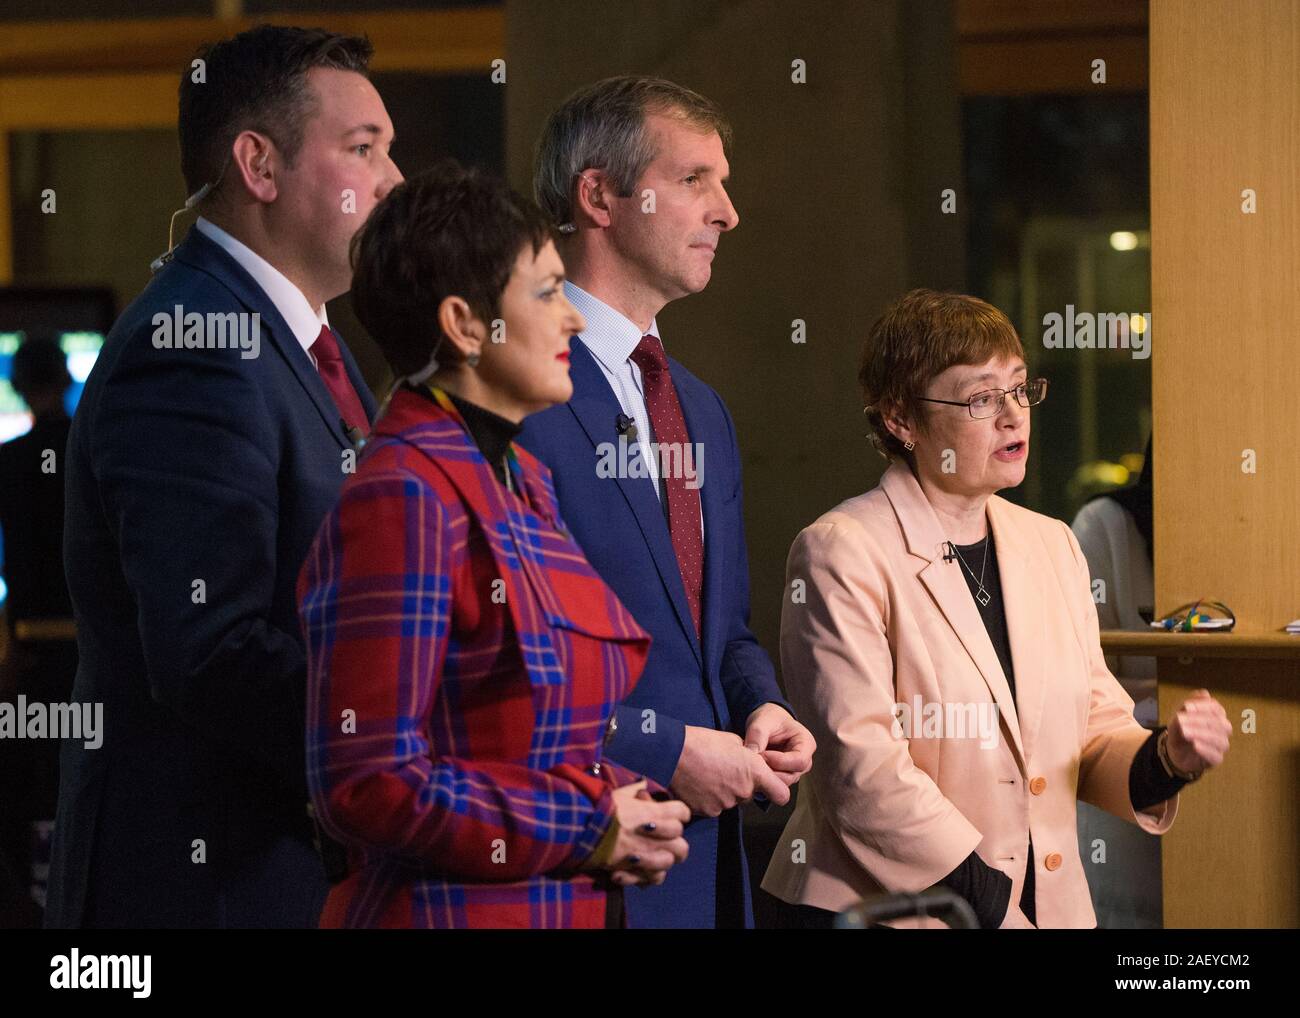 Edinburgh, UK. 11th Dec, 2019. Pictured: (left-right) Miles Briggs MSP - Scottish Conservative and Unionist Party; Angela Constance MSP - Scottish National Party; Liam McArthur MSP - Scottish Liberal Democrat Party; Sarah Boyack MSP - Scottish Labour Party. Live TV broadcast interview with MSP's in the Scottish Parliament. Credit: Colin Fisher/Alamy Live News Stock Photo